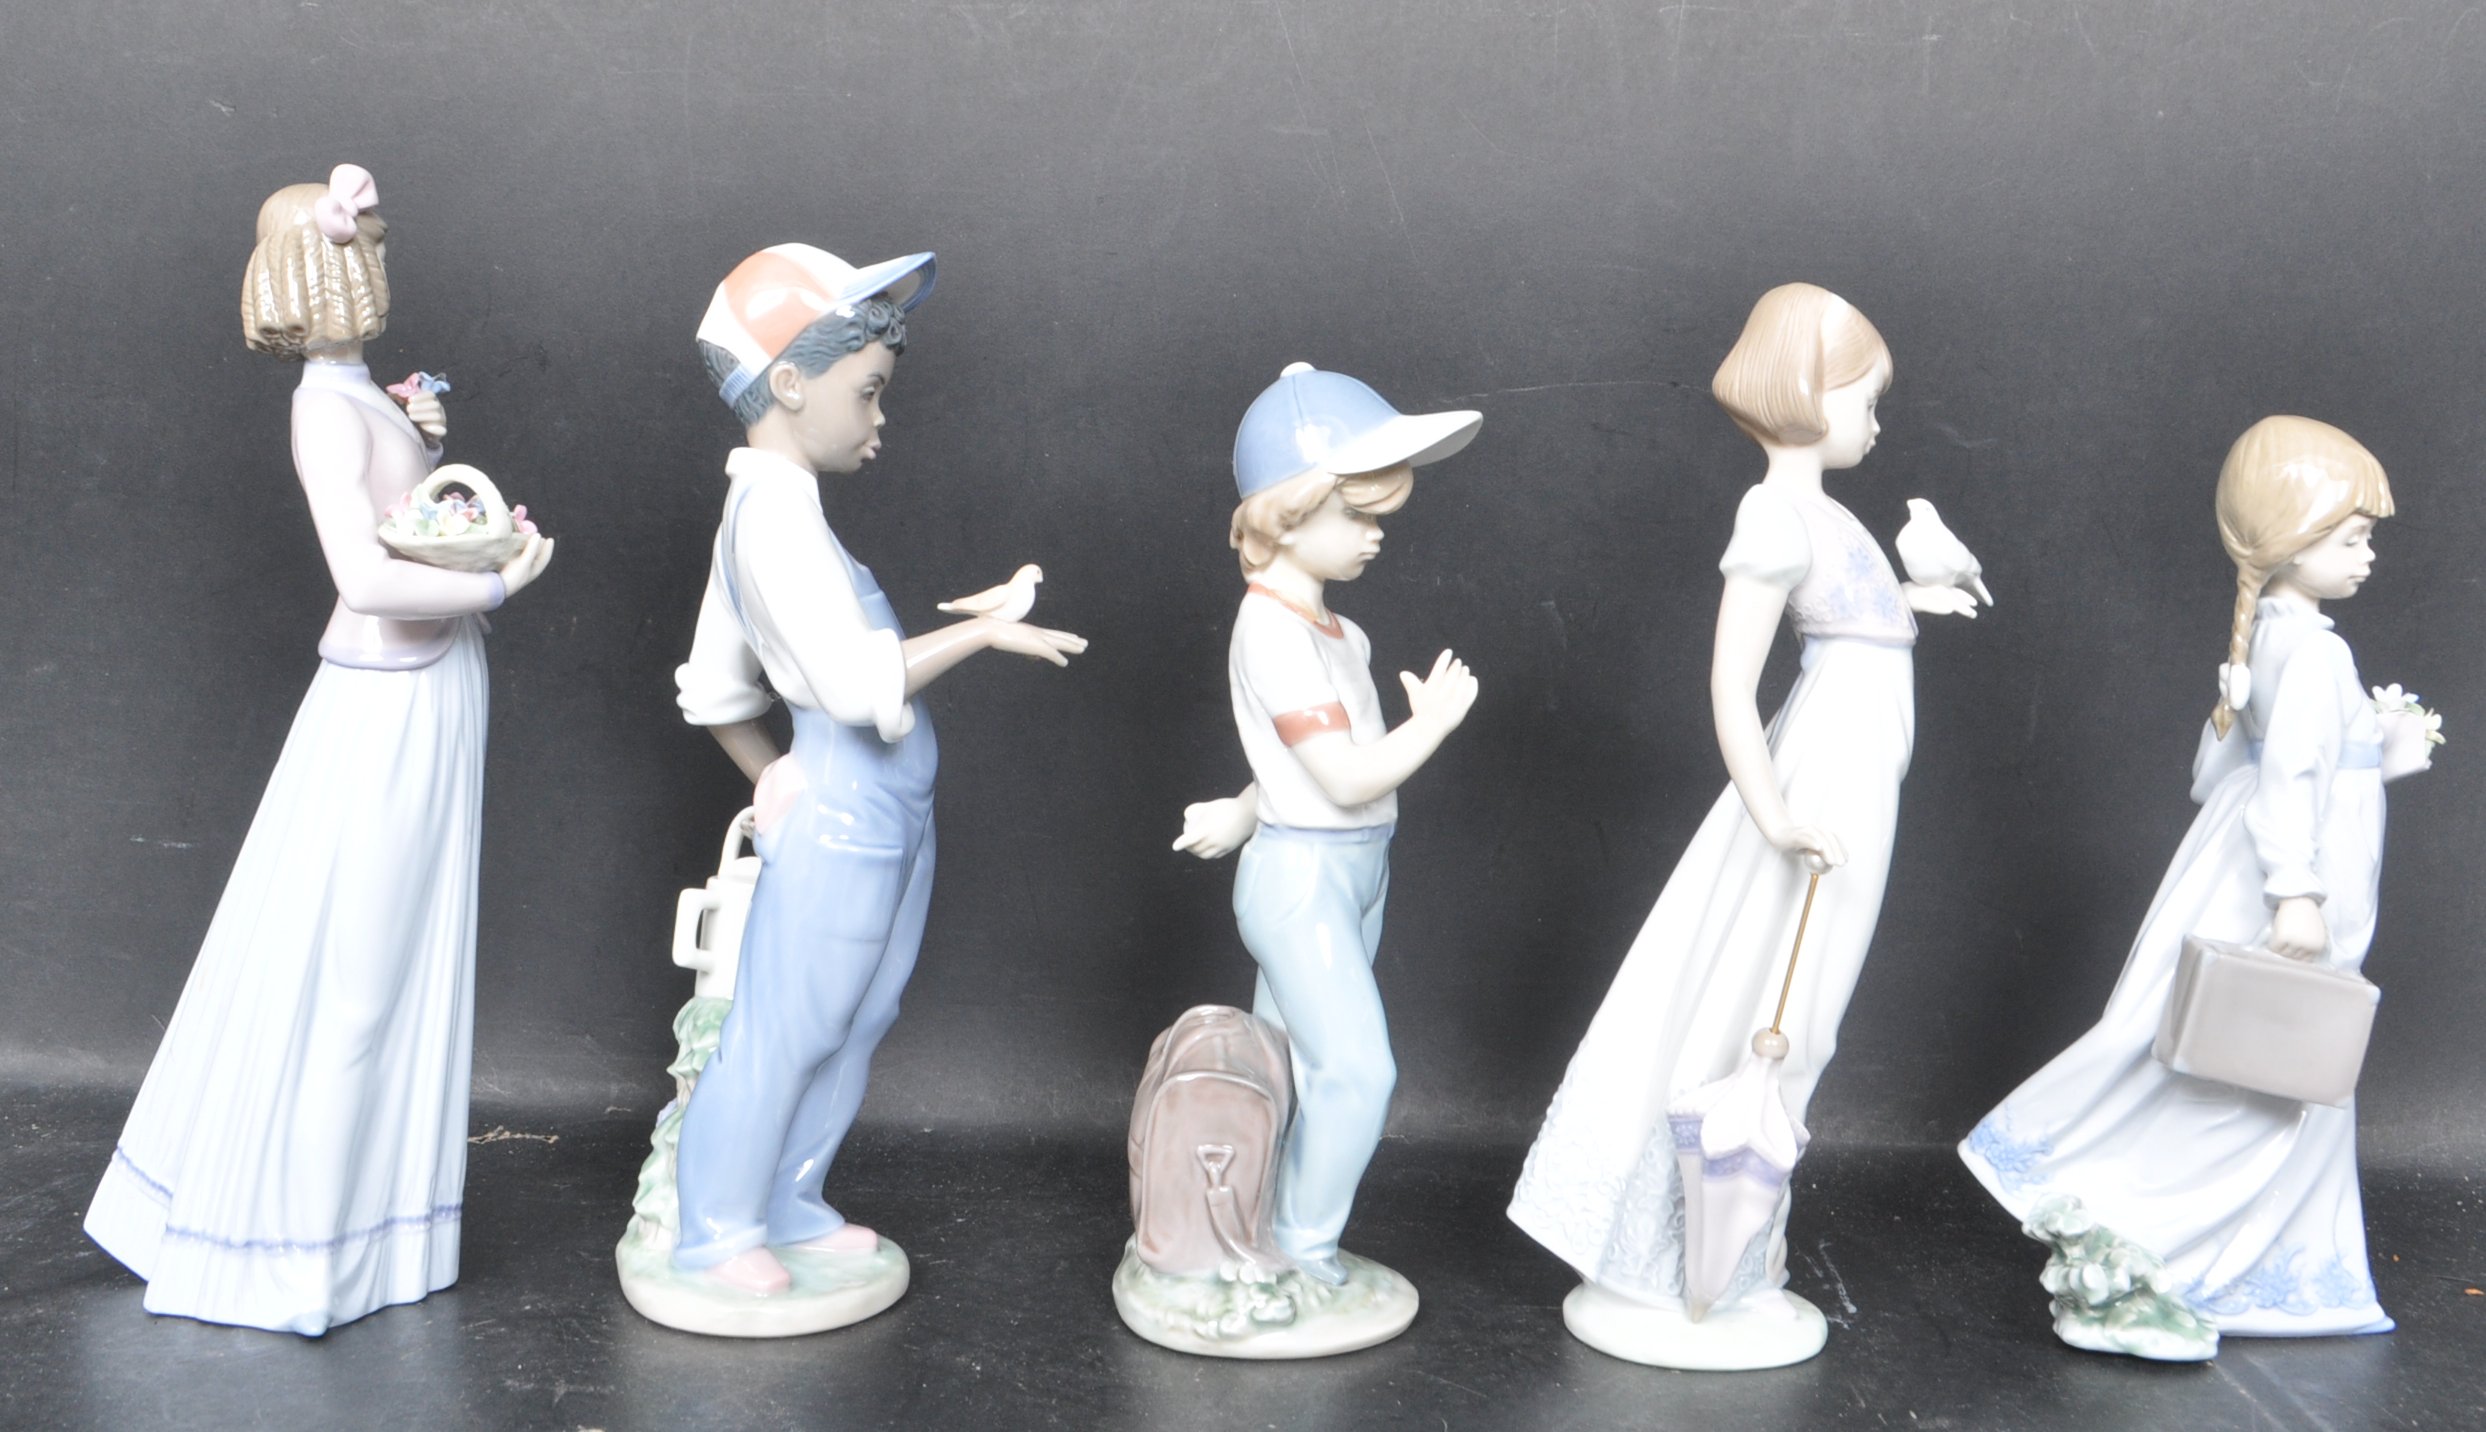 COLLECTION OF FIVE SPANISH LLADRO CERAMIC PORCELAIN FIGURINES - Image 2 of 6